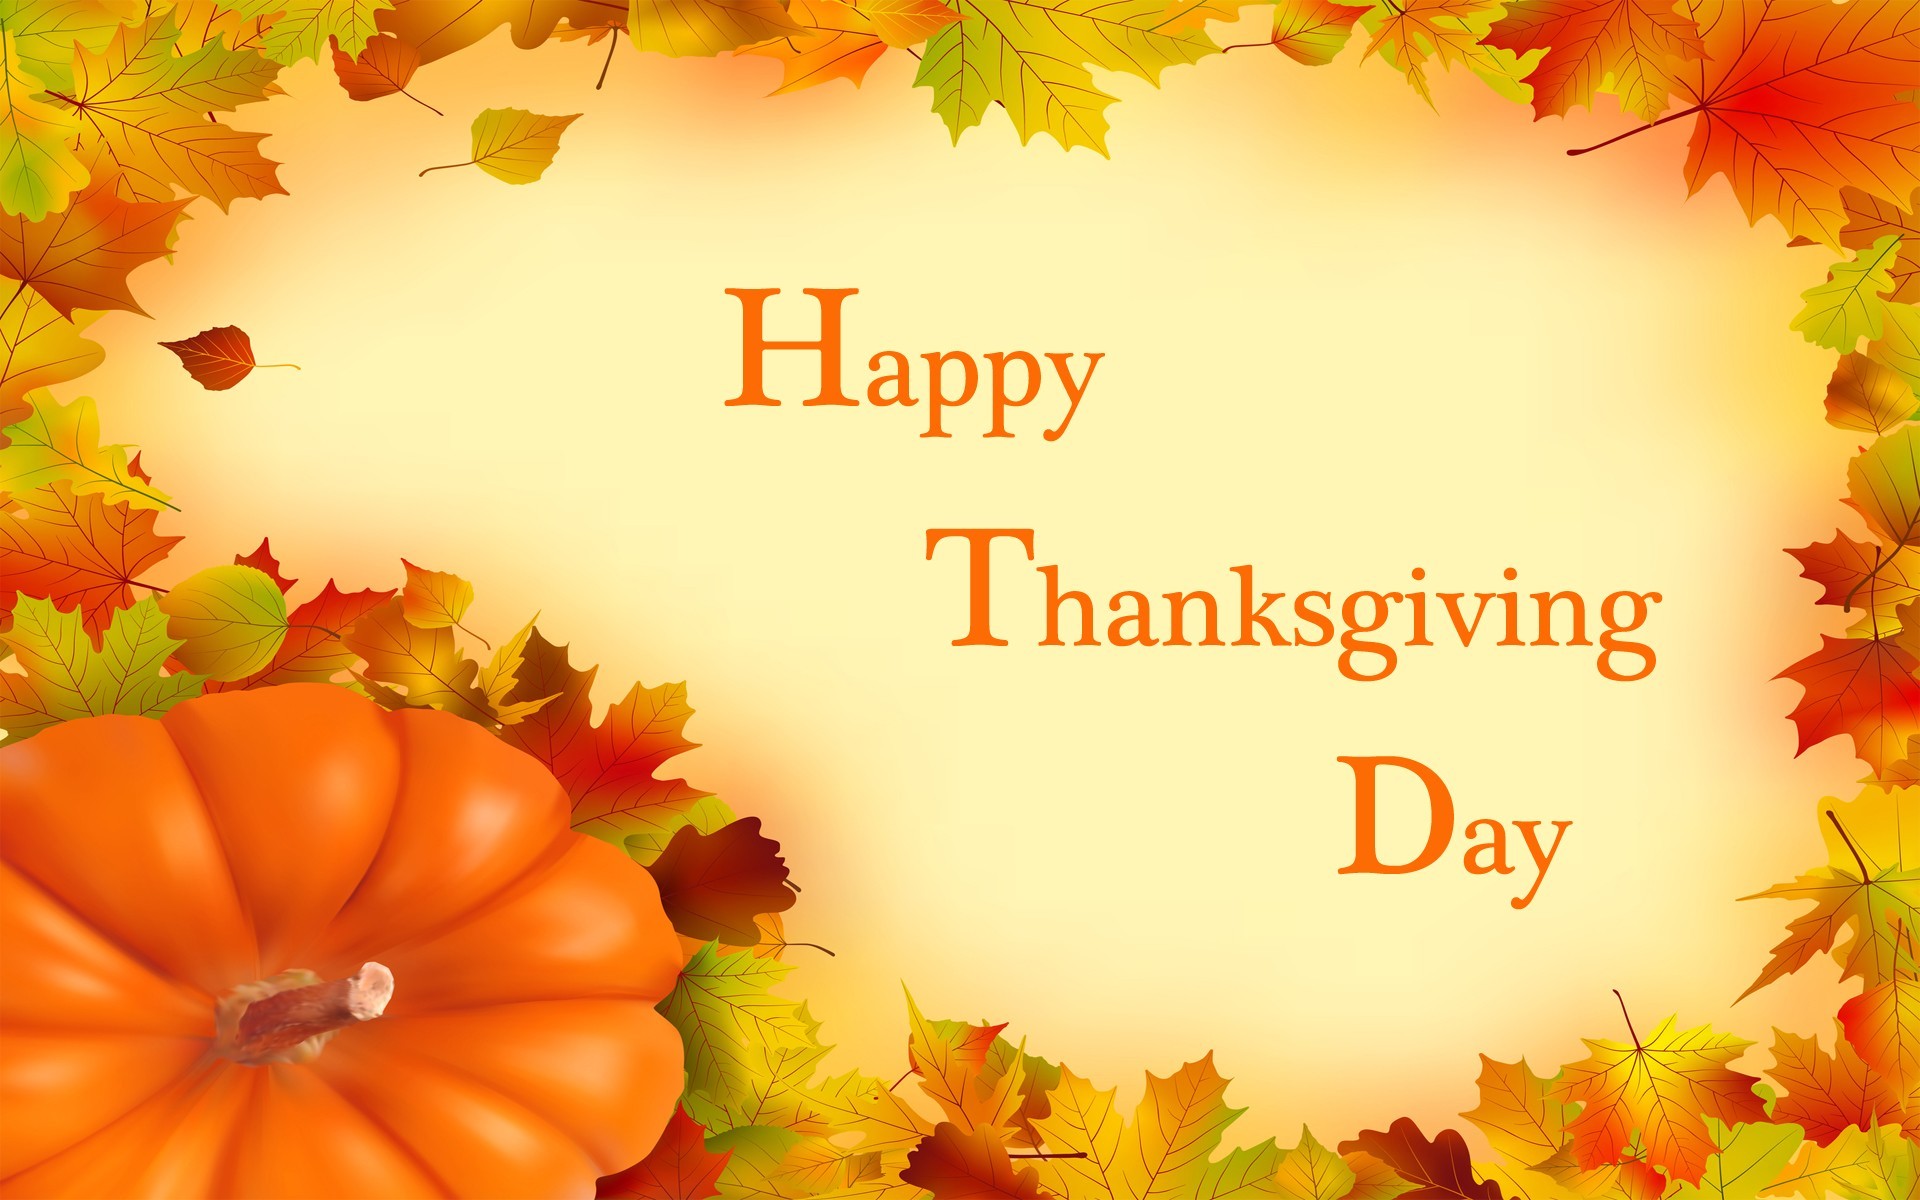 Happy Thanksgiving Pictures Download